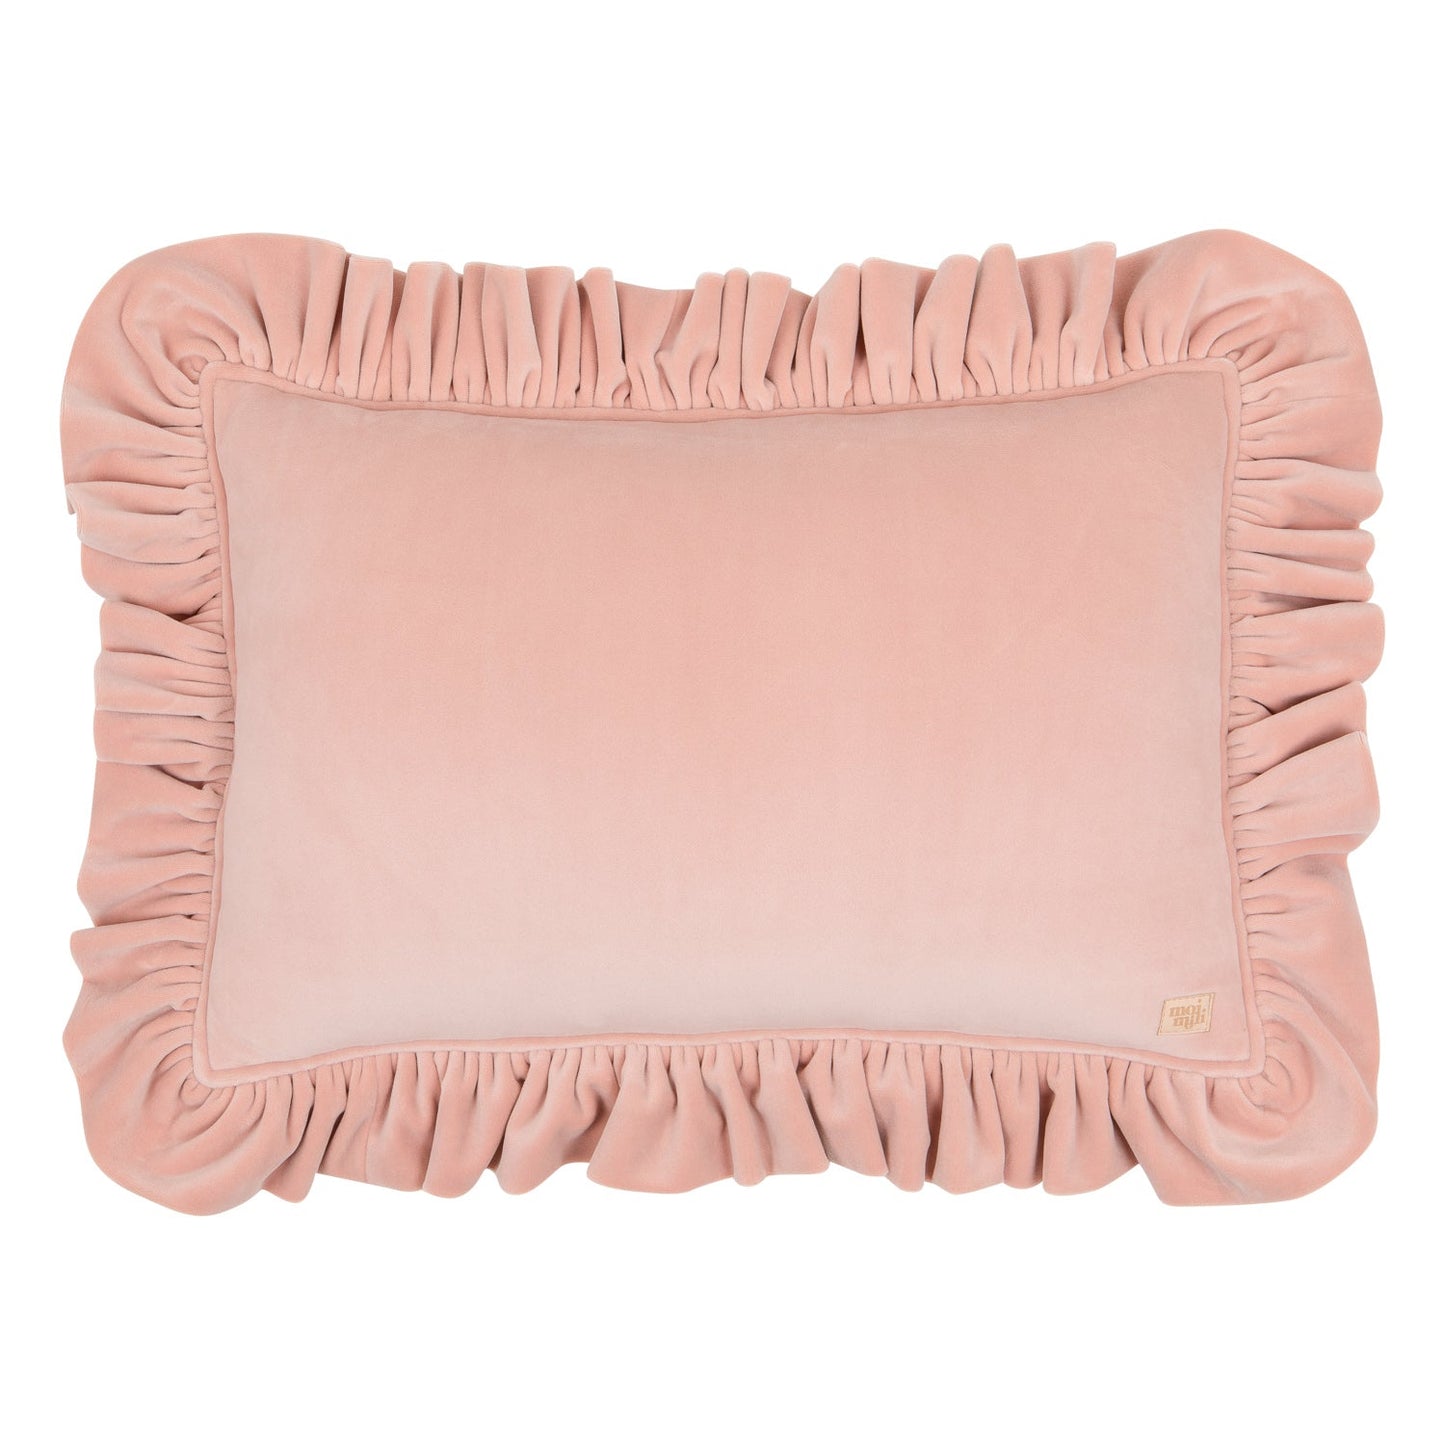 “Apricot” Soft Velvet Pillow with Frill